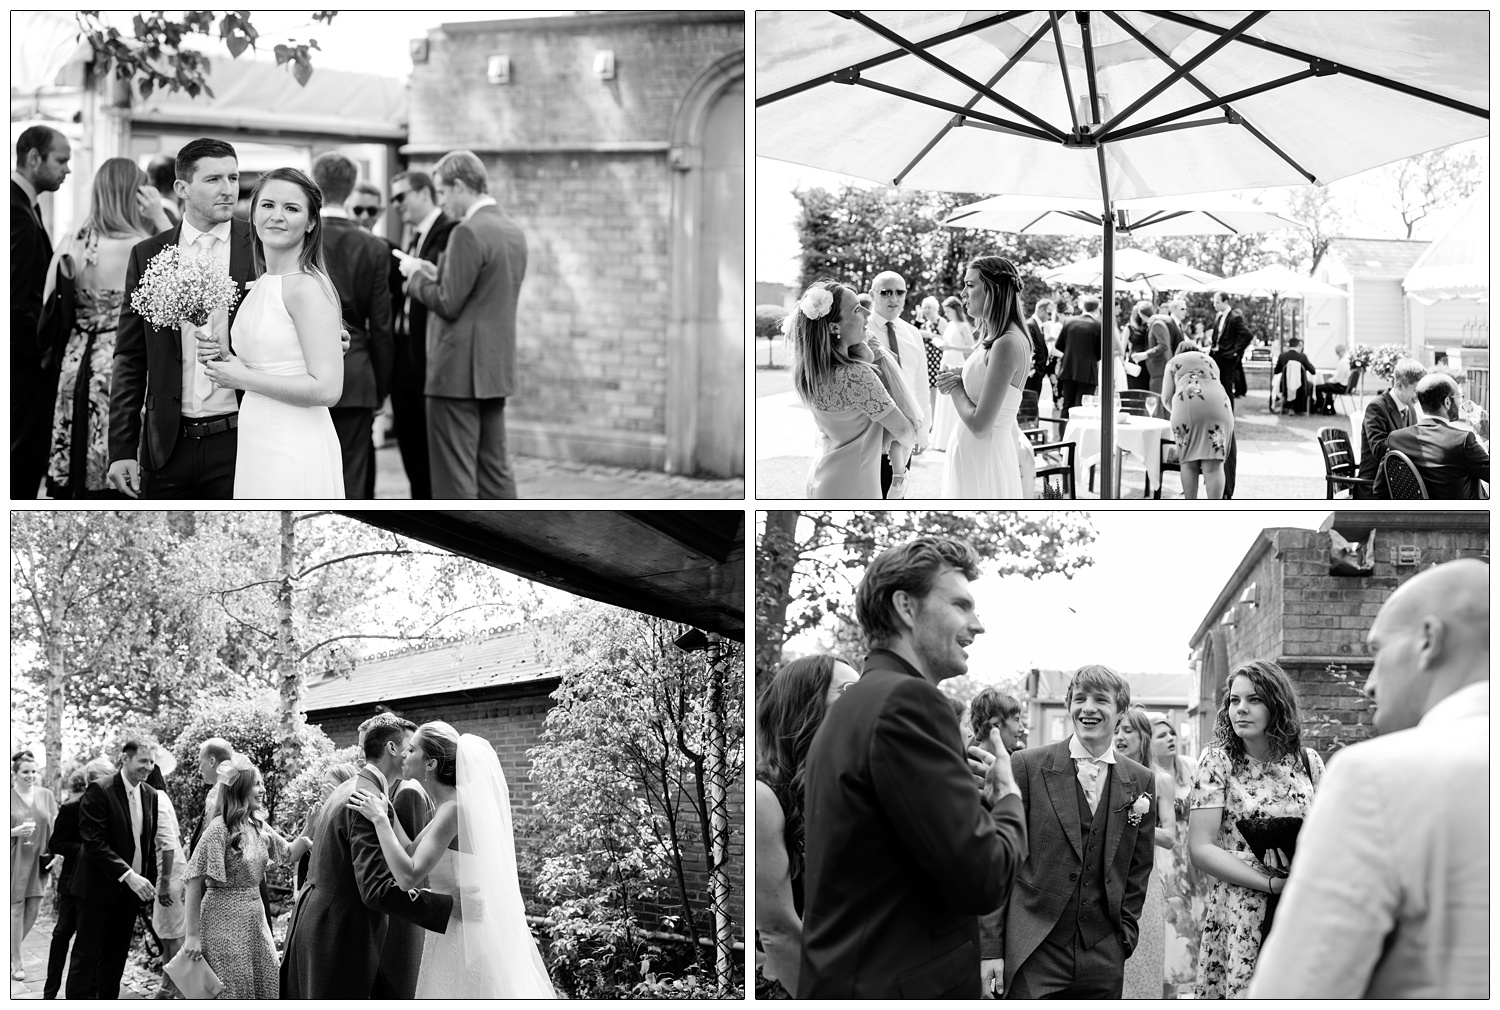 Black and white photographs from Friern Manor. A woman holds flowers and looks at the camera. A bride kisses a guest in the receiving line.